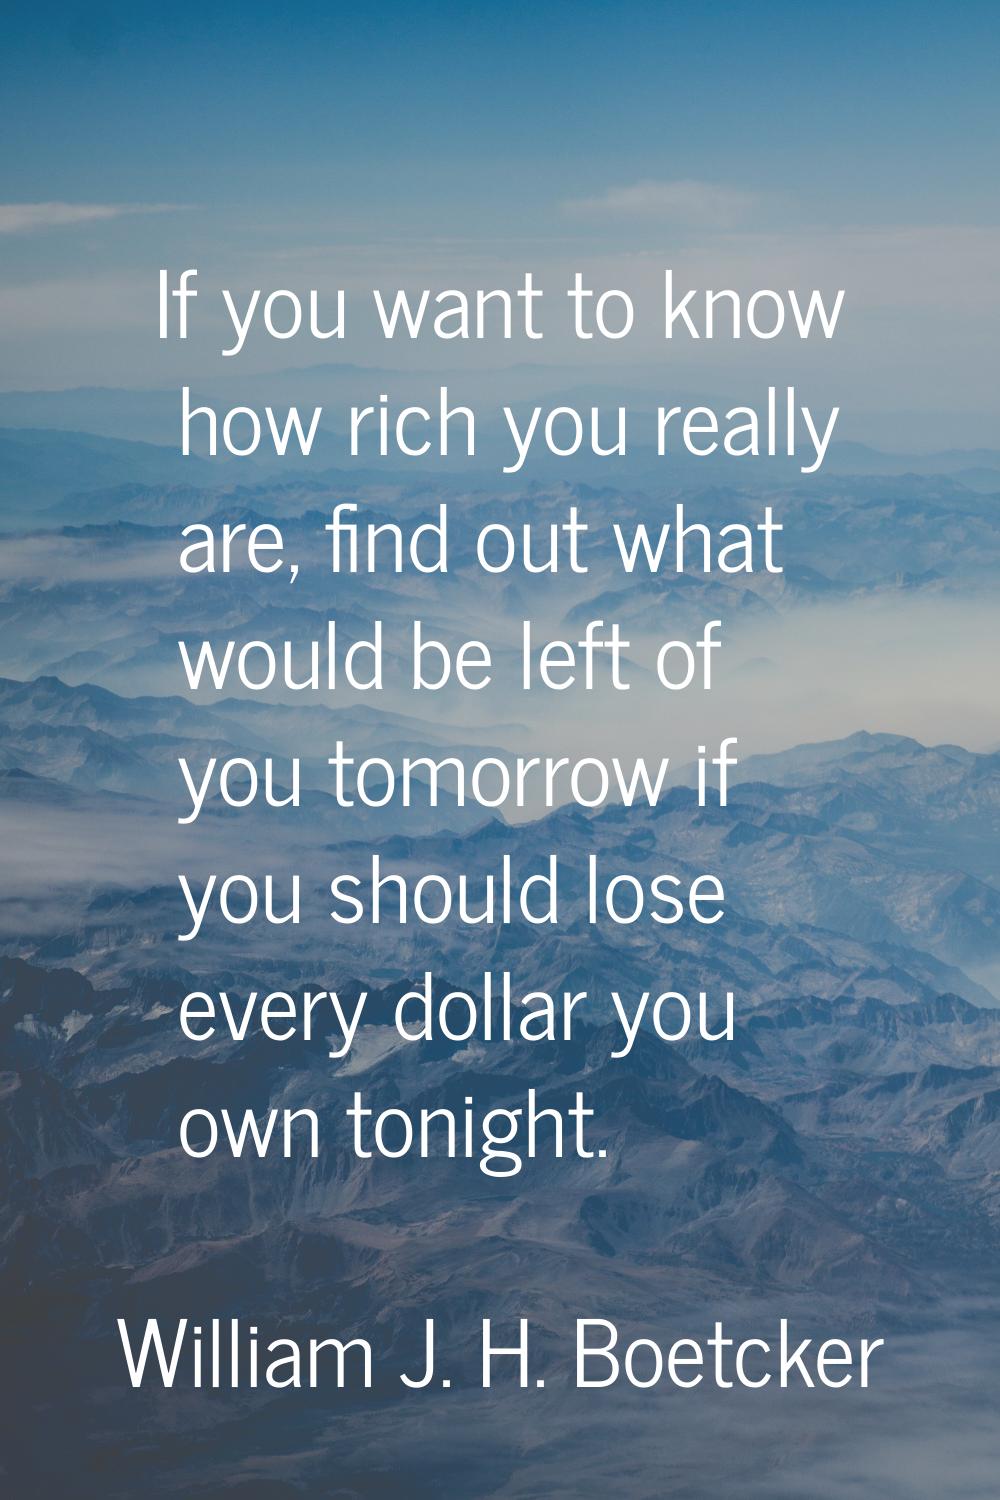 If you want to know how rich you really are, find out what would be left of you tomorrow if you sho